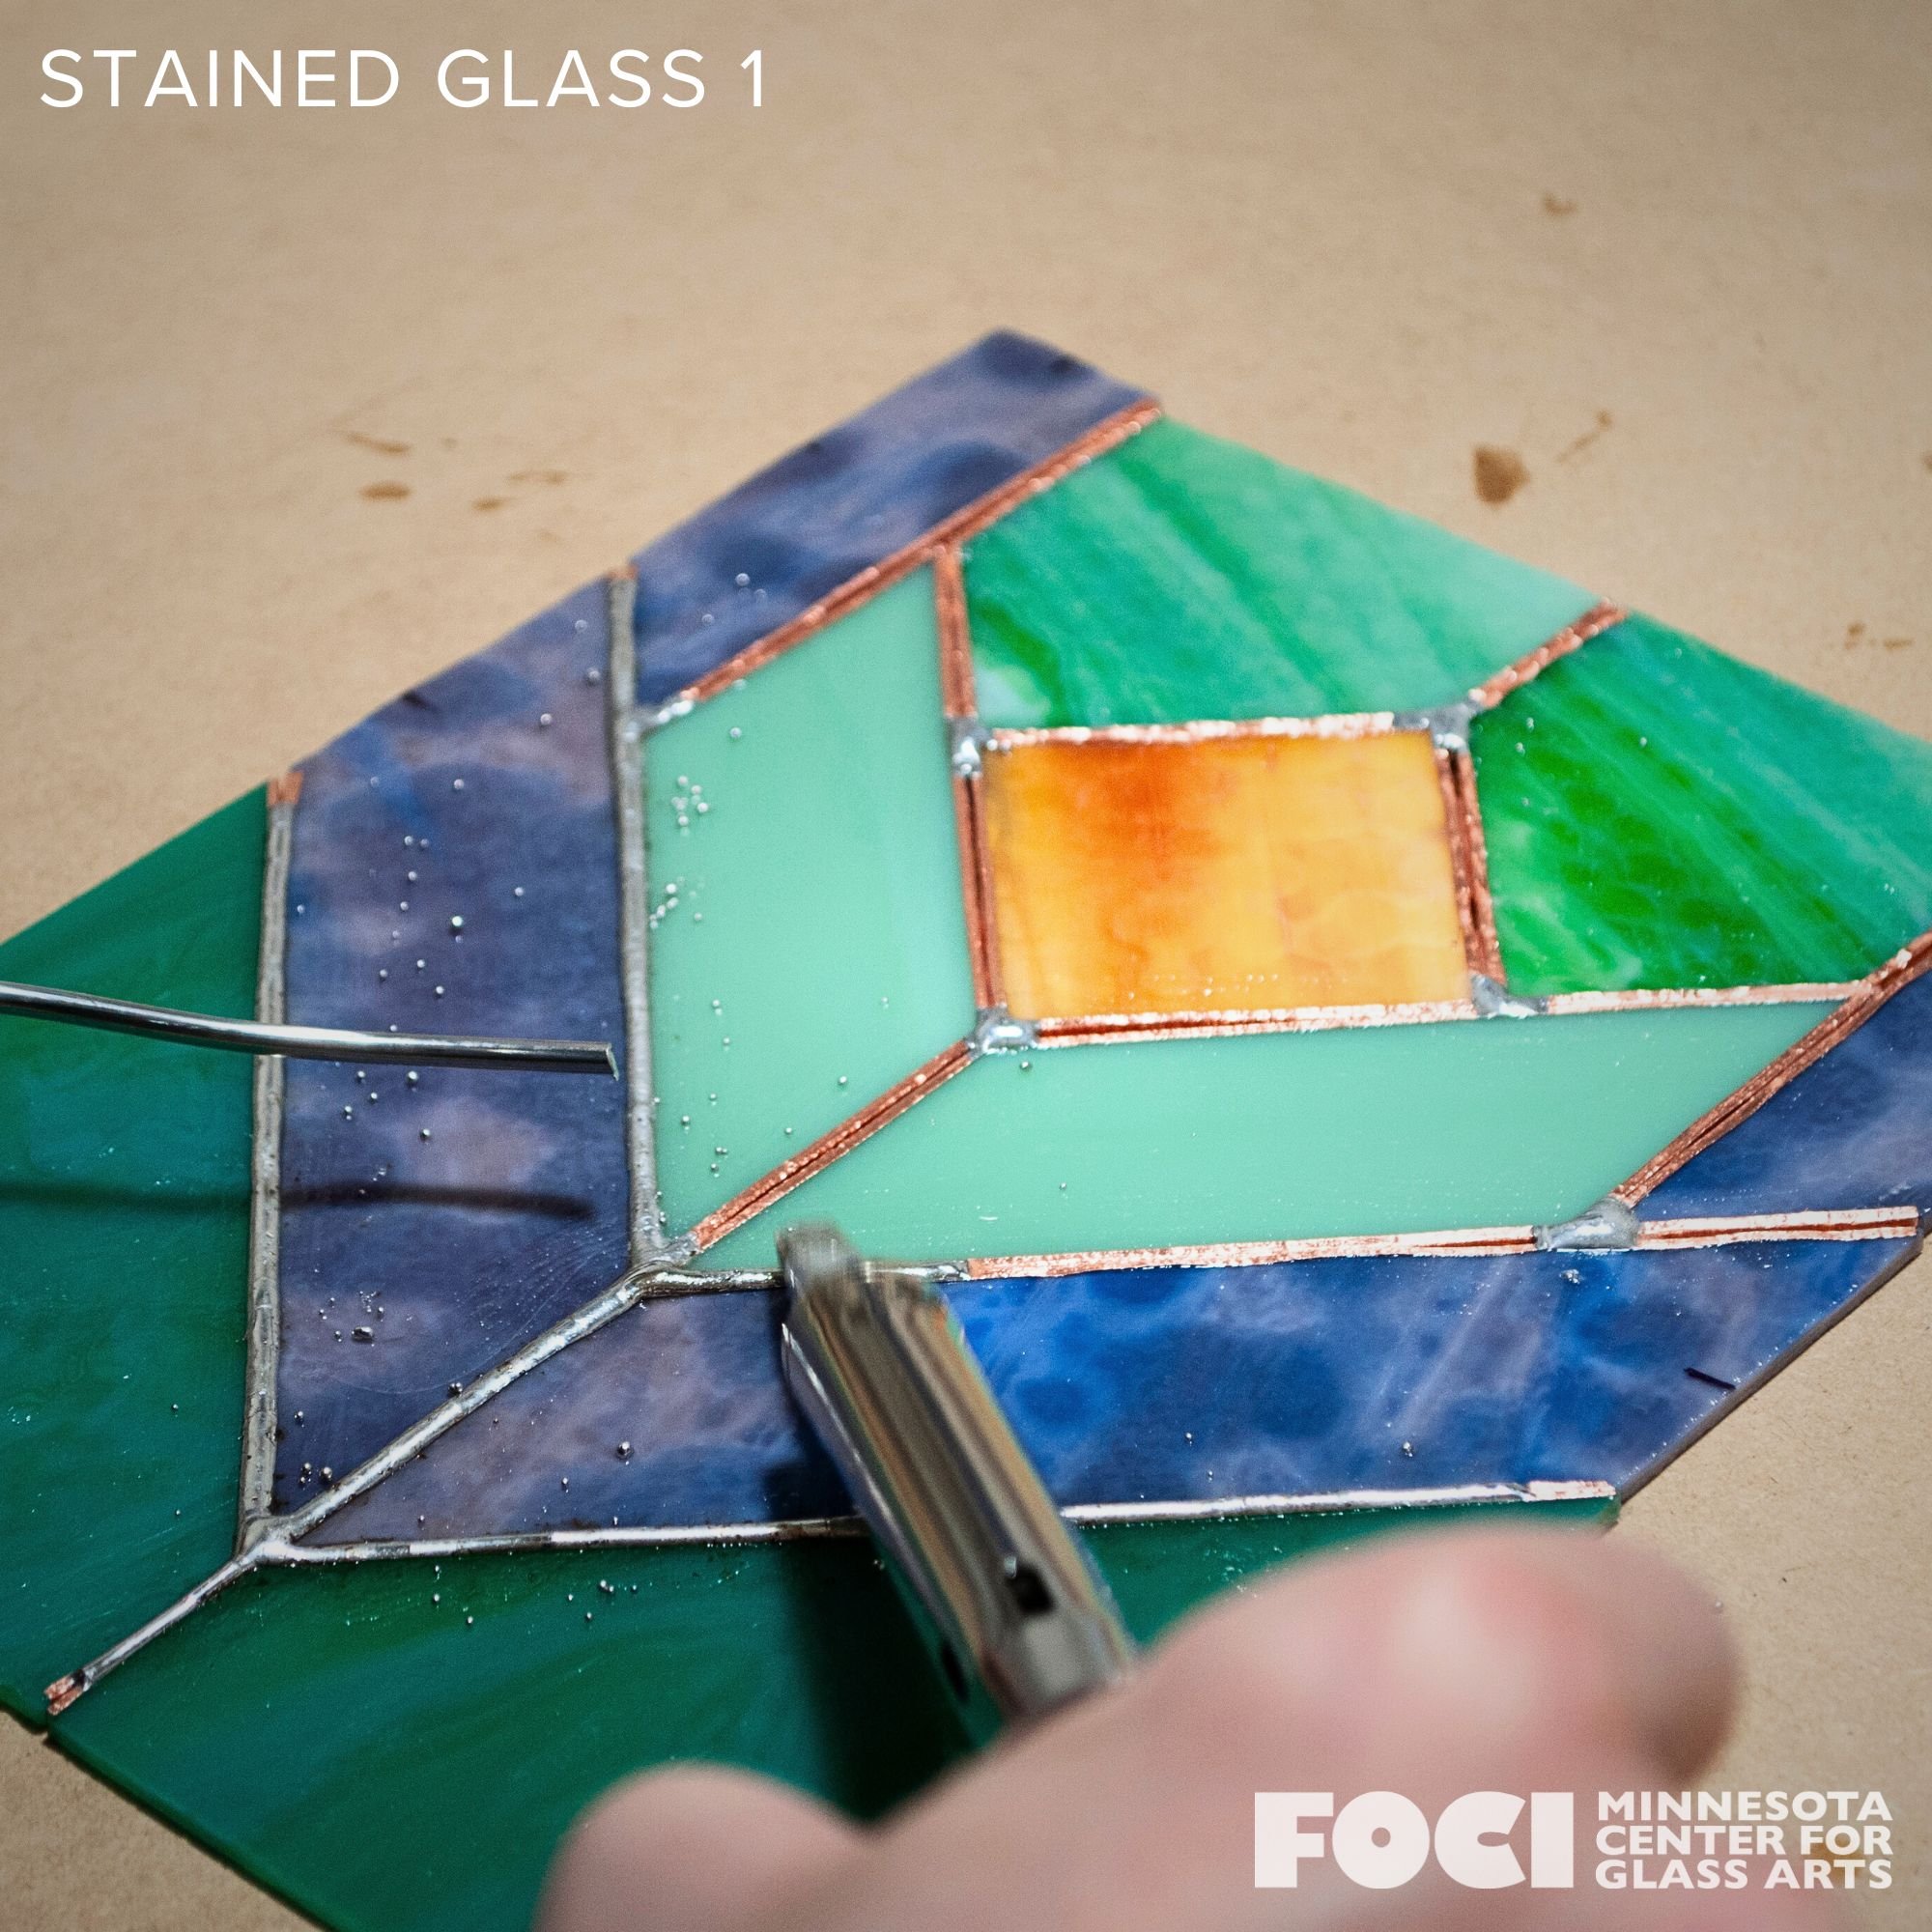 170 copper foil ideas  stained glass patterns, stained glass projects,  stained glass art